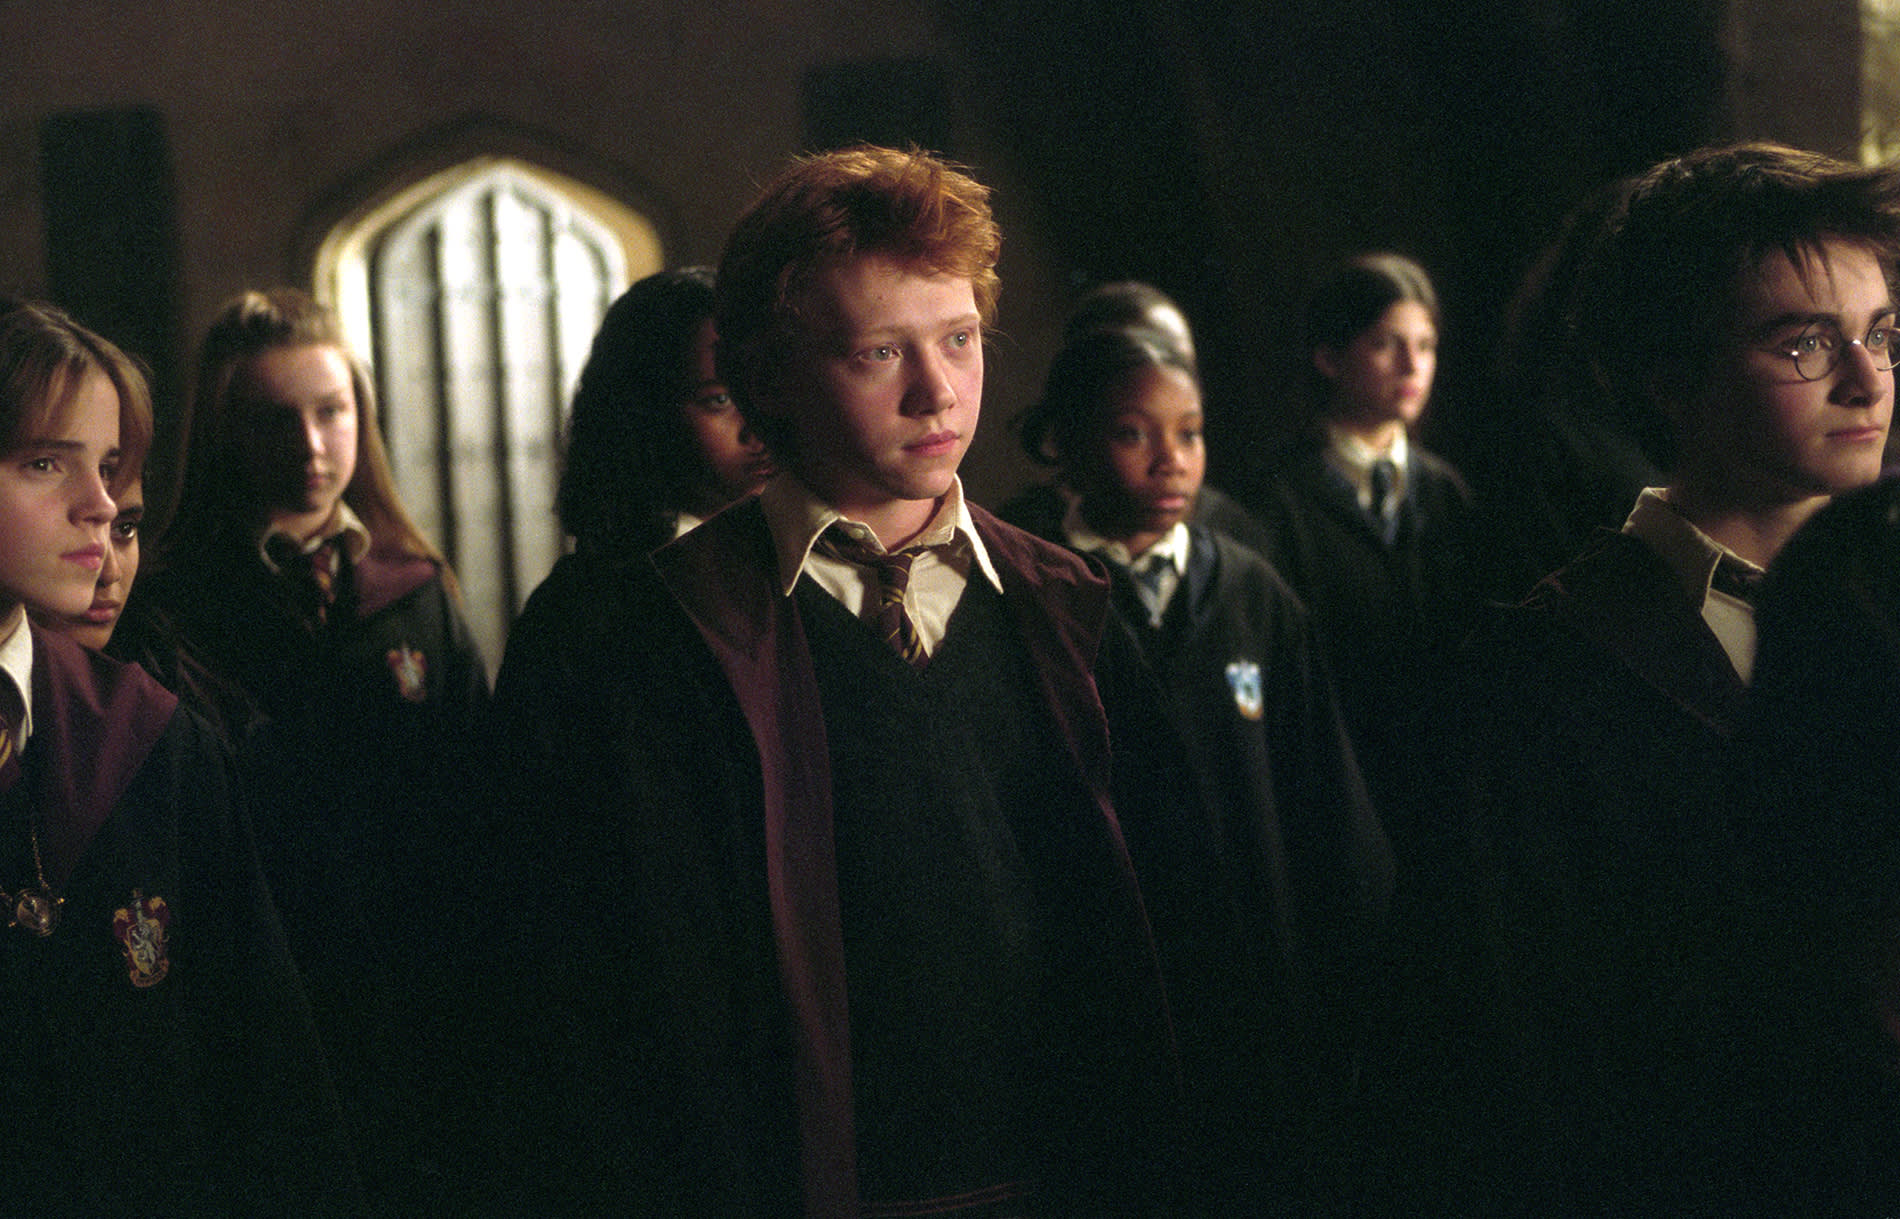 WB-HP-F3-hermione-ron-and-harry-among-other-students-web-landscape